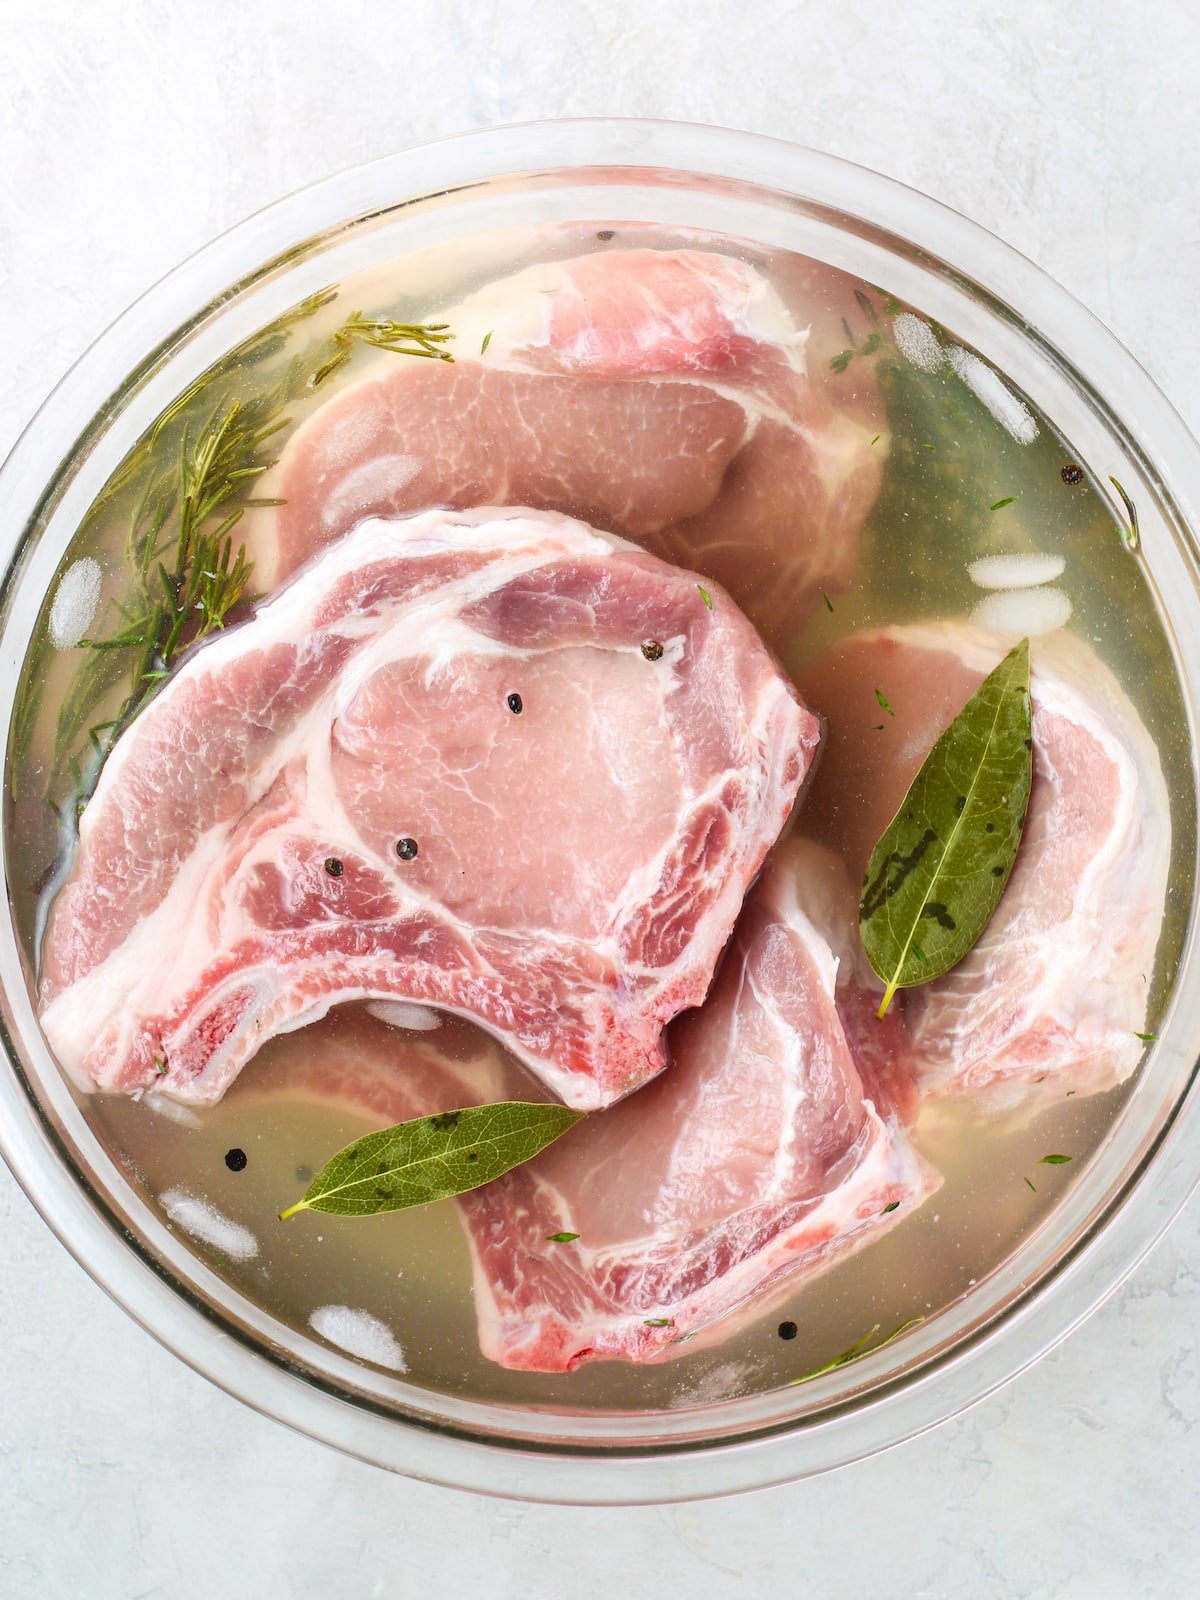 Pork chops in a large bowl with the brine.